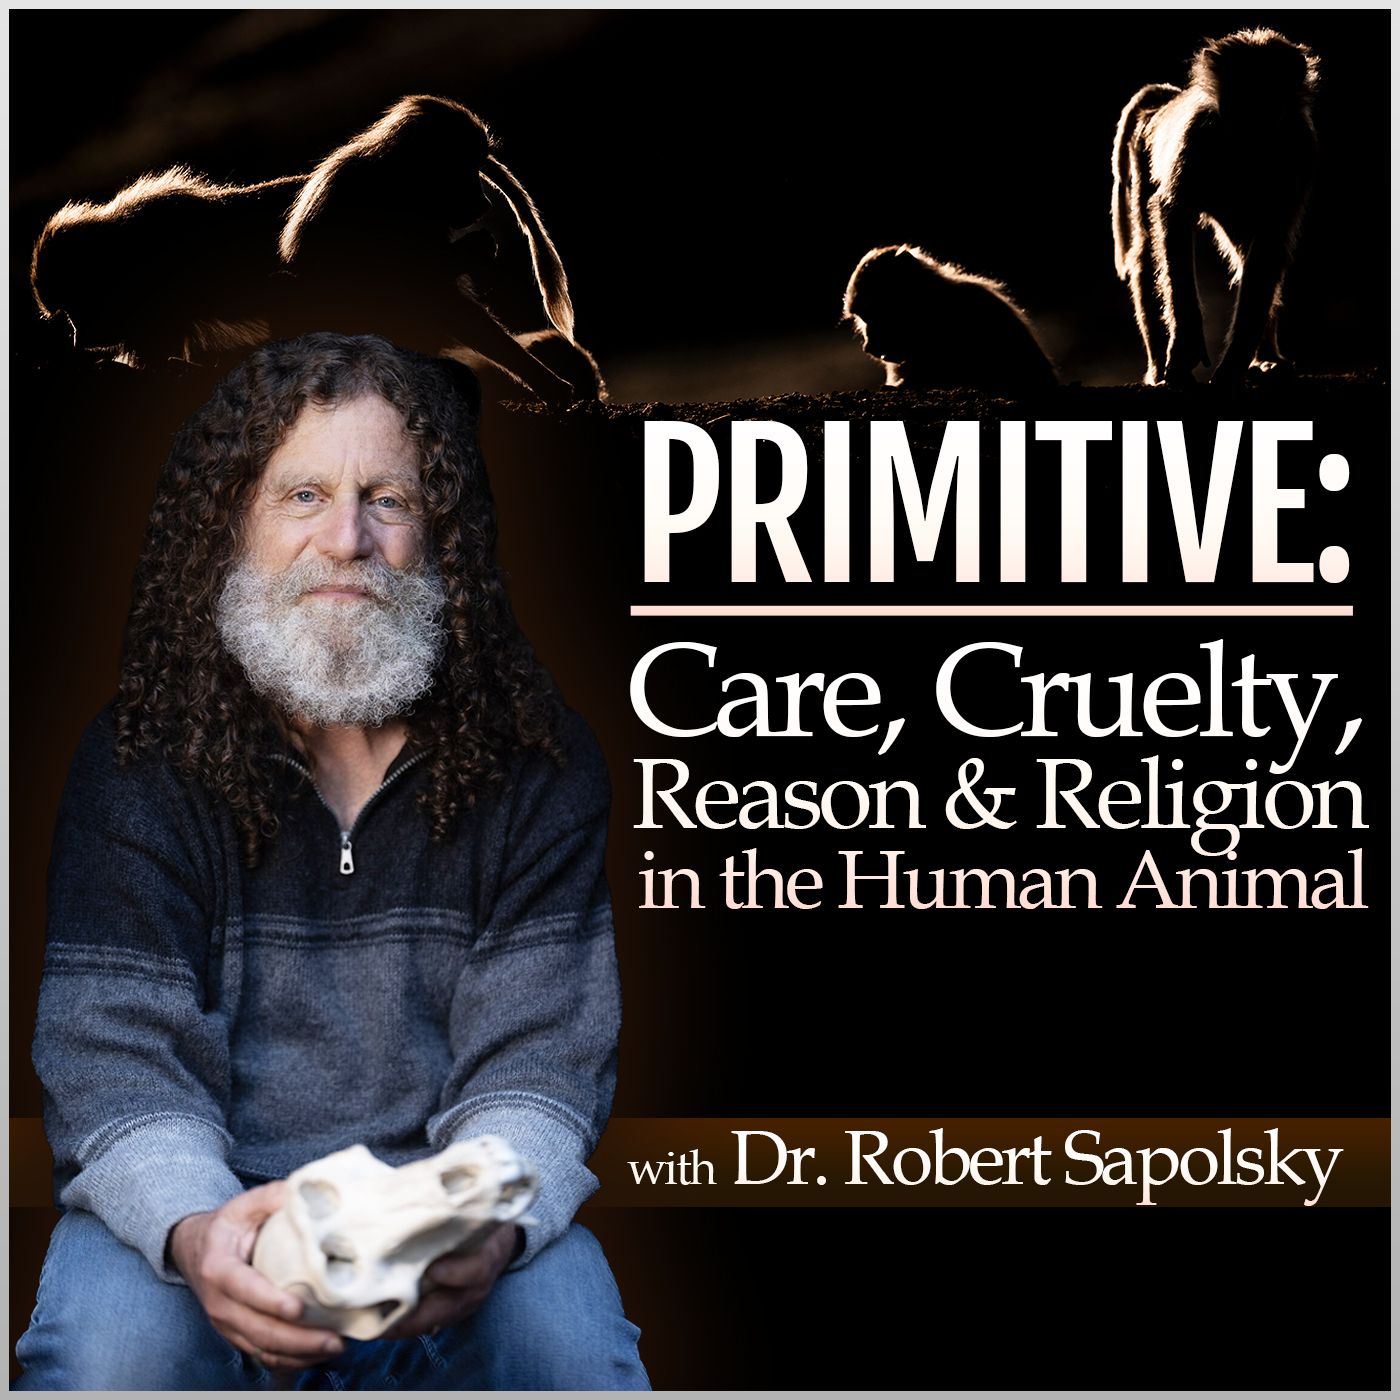 PRIMITIVE: Care, Cruelty, Religion, & Reason in the Human Animal (with Dr. Robert Sapolsky)